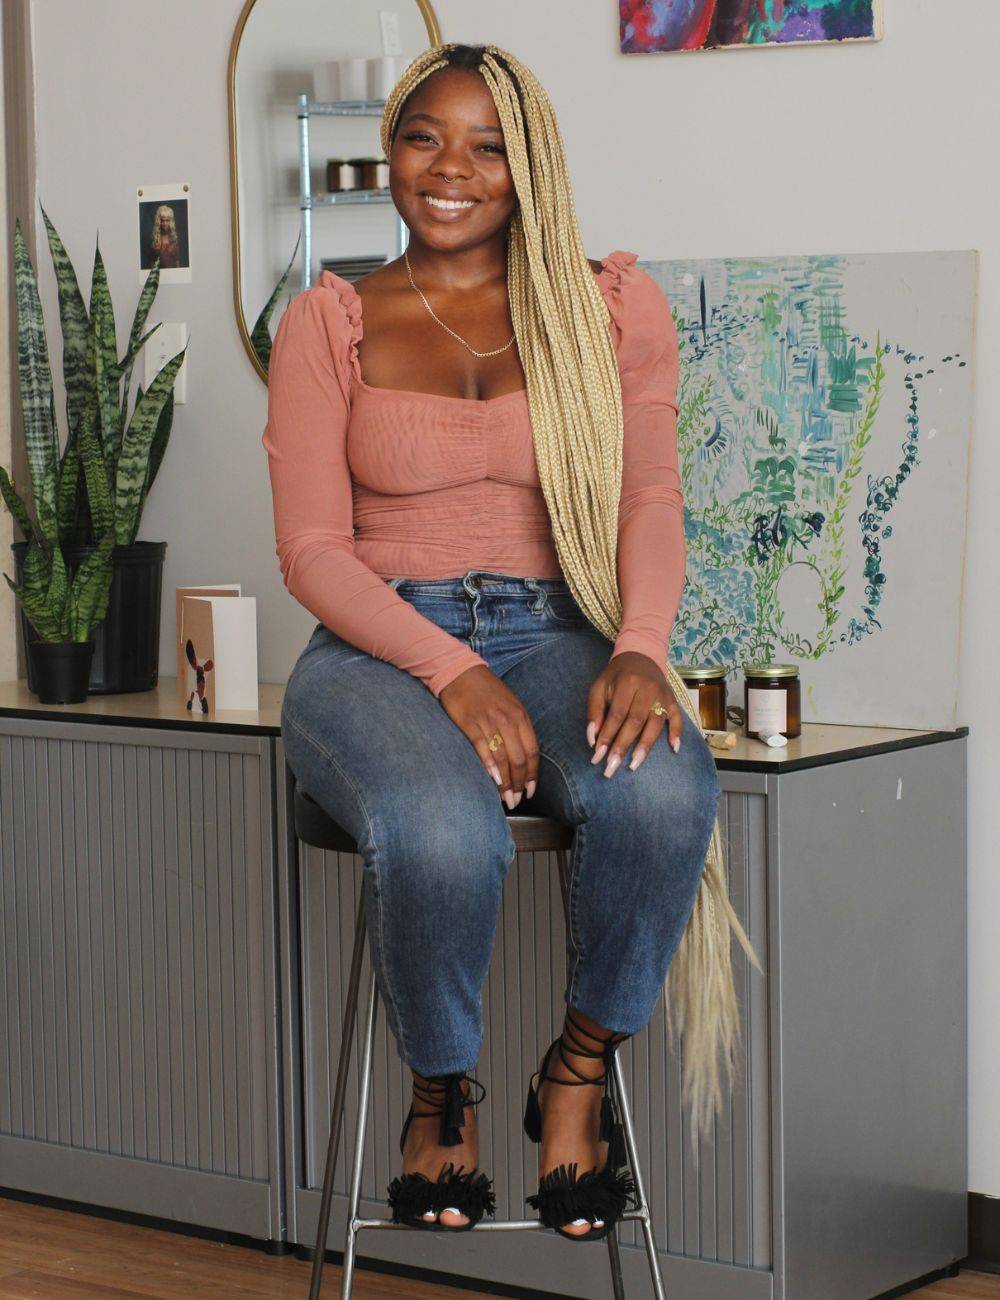 Shaquanda Reese, founder of Burst Beans Coffee